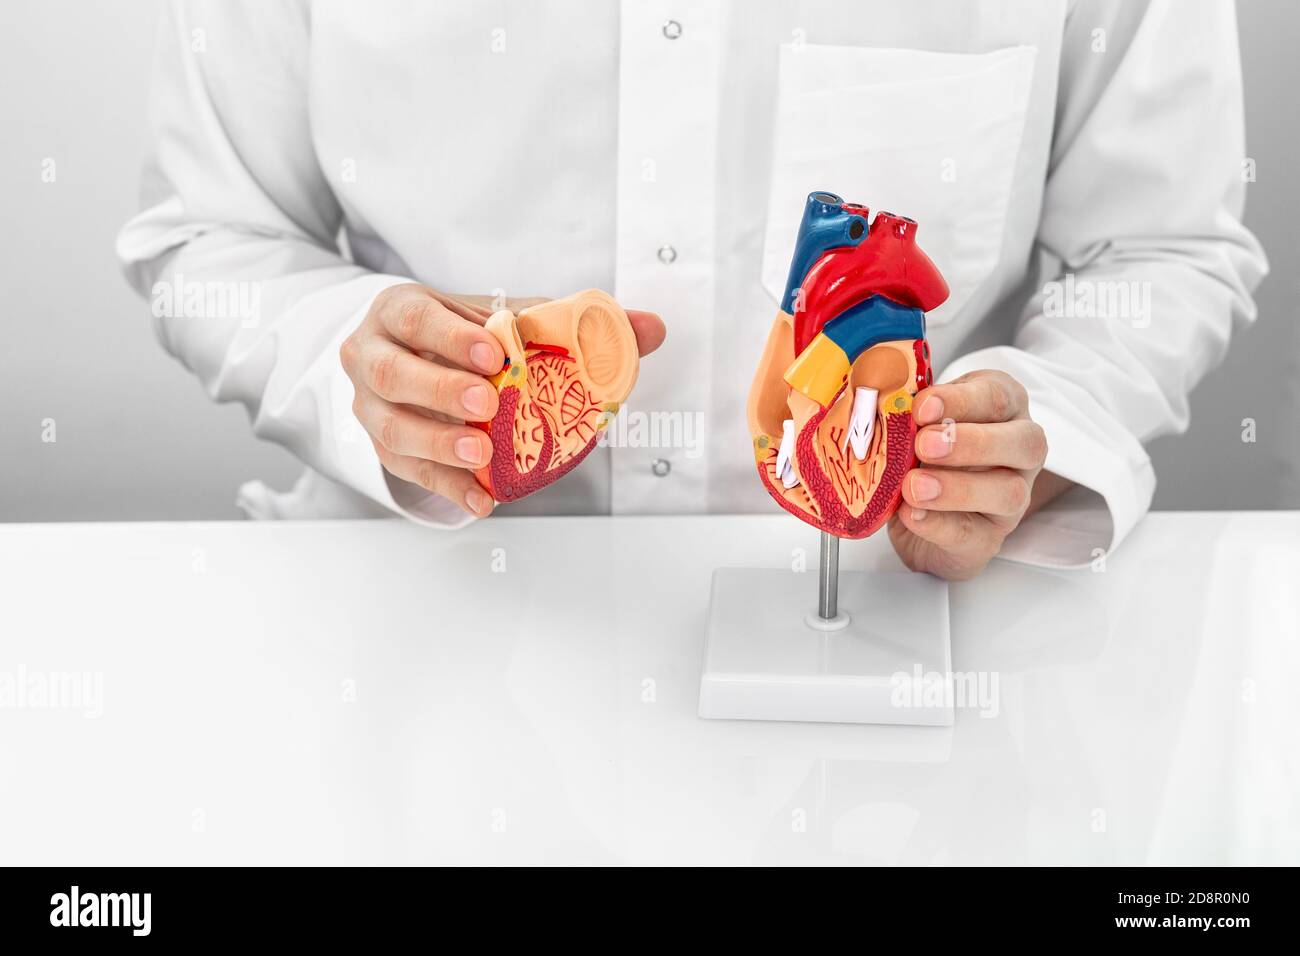 Concept of occupation cardiologist, World Heart Day. Cardiologist wearing a medical coat showing a heart anatomical model and heart physiology Stock Photo